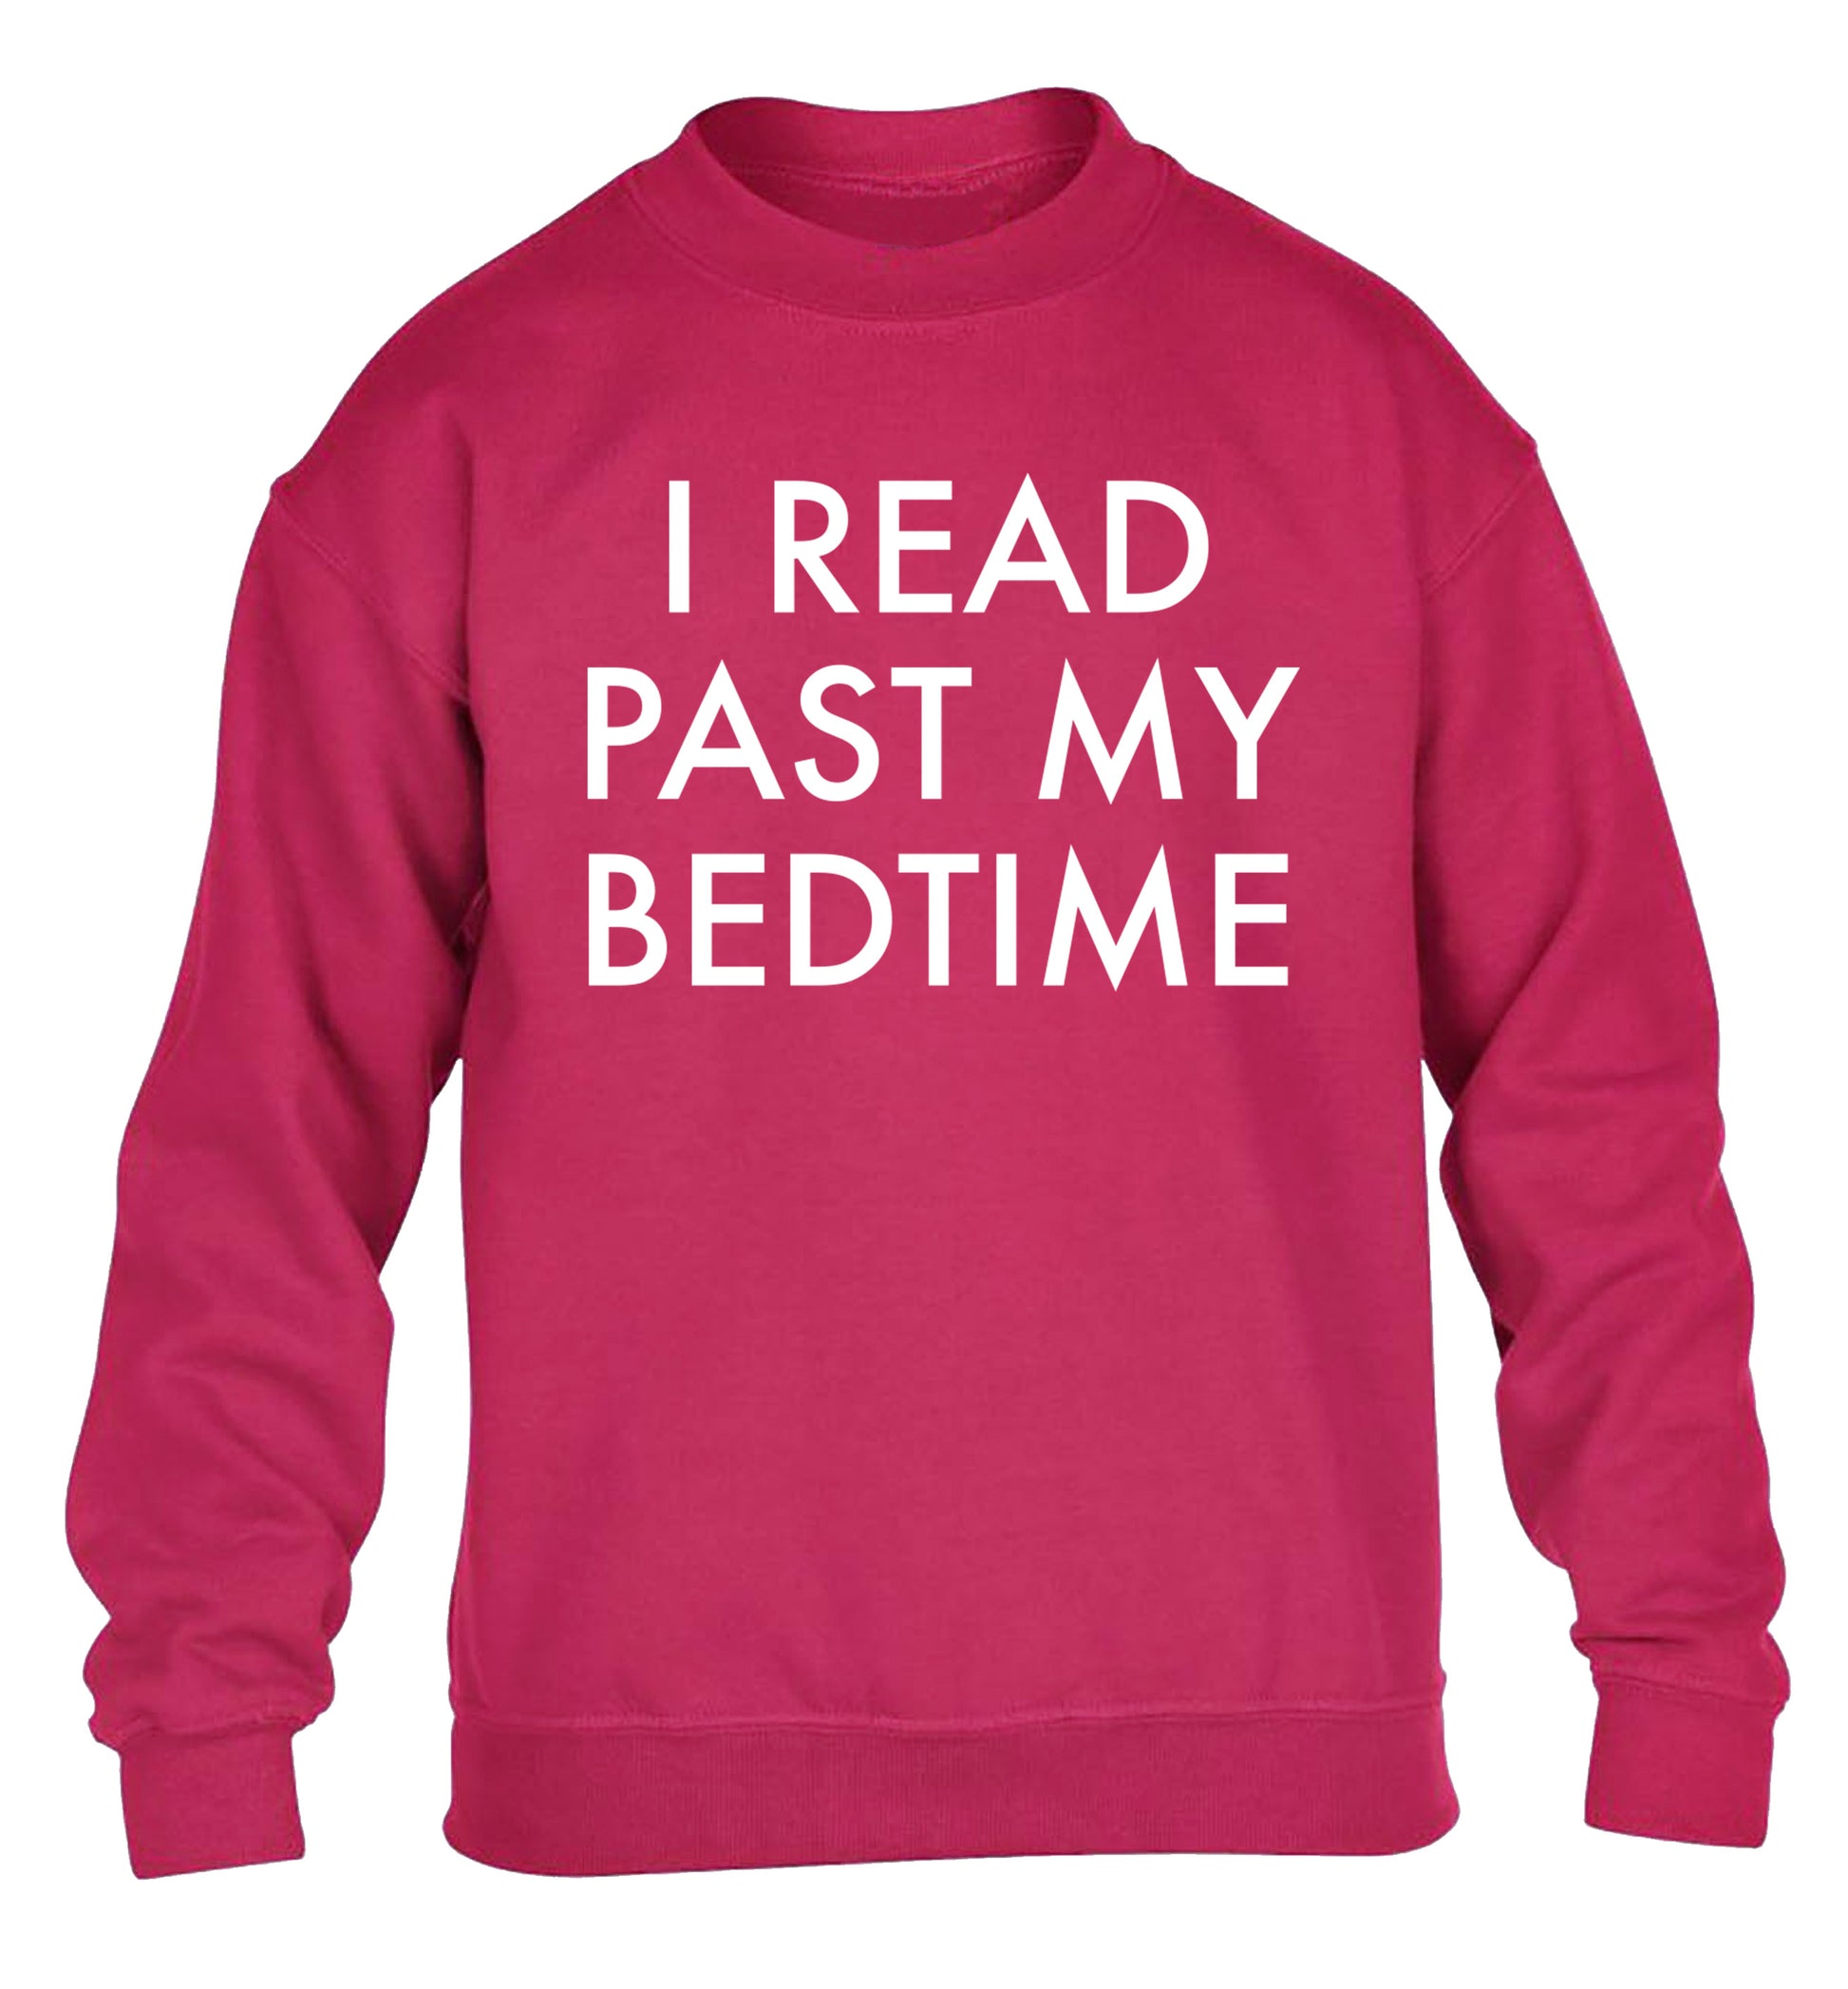 I read past my bedtime children's pink sweater 12-14 Years